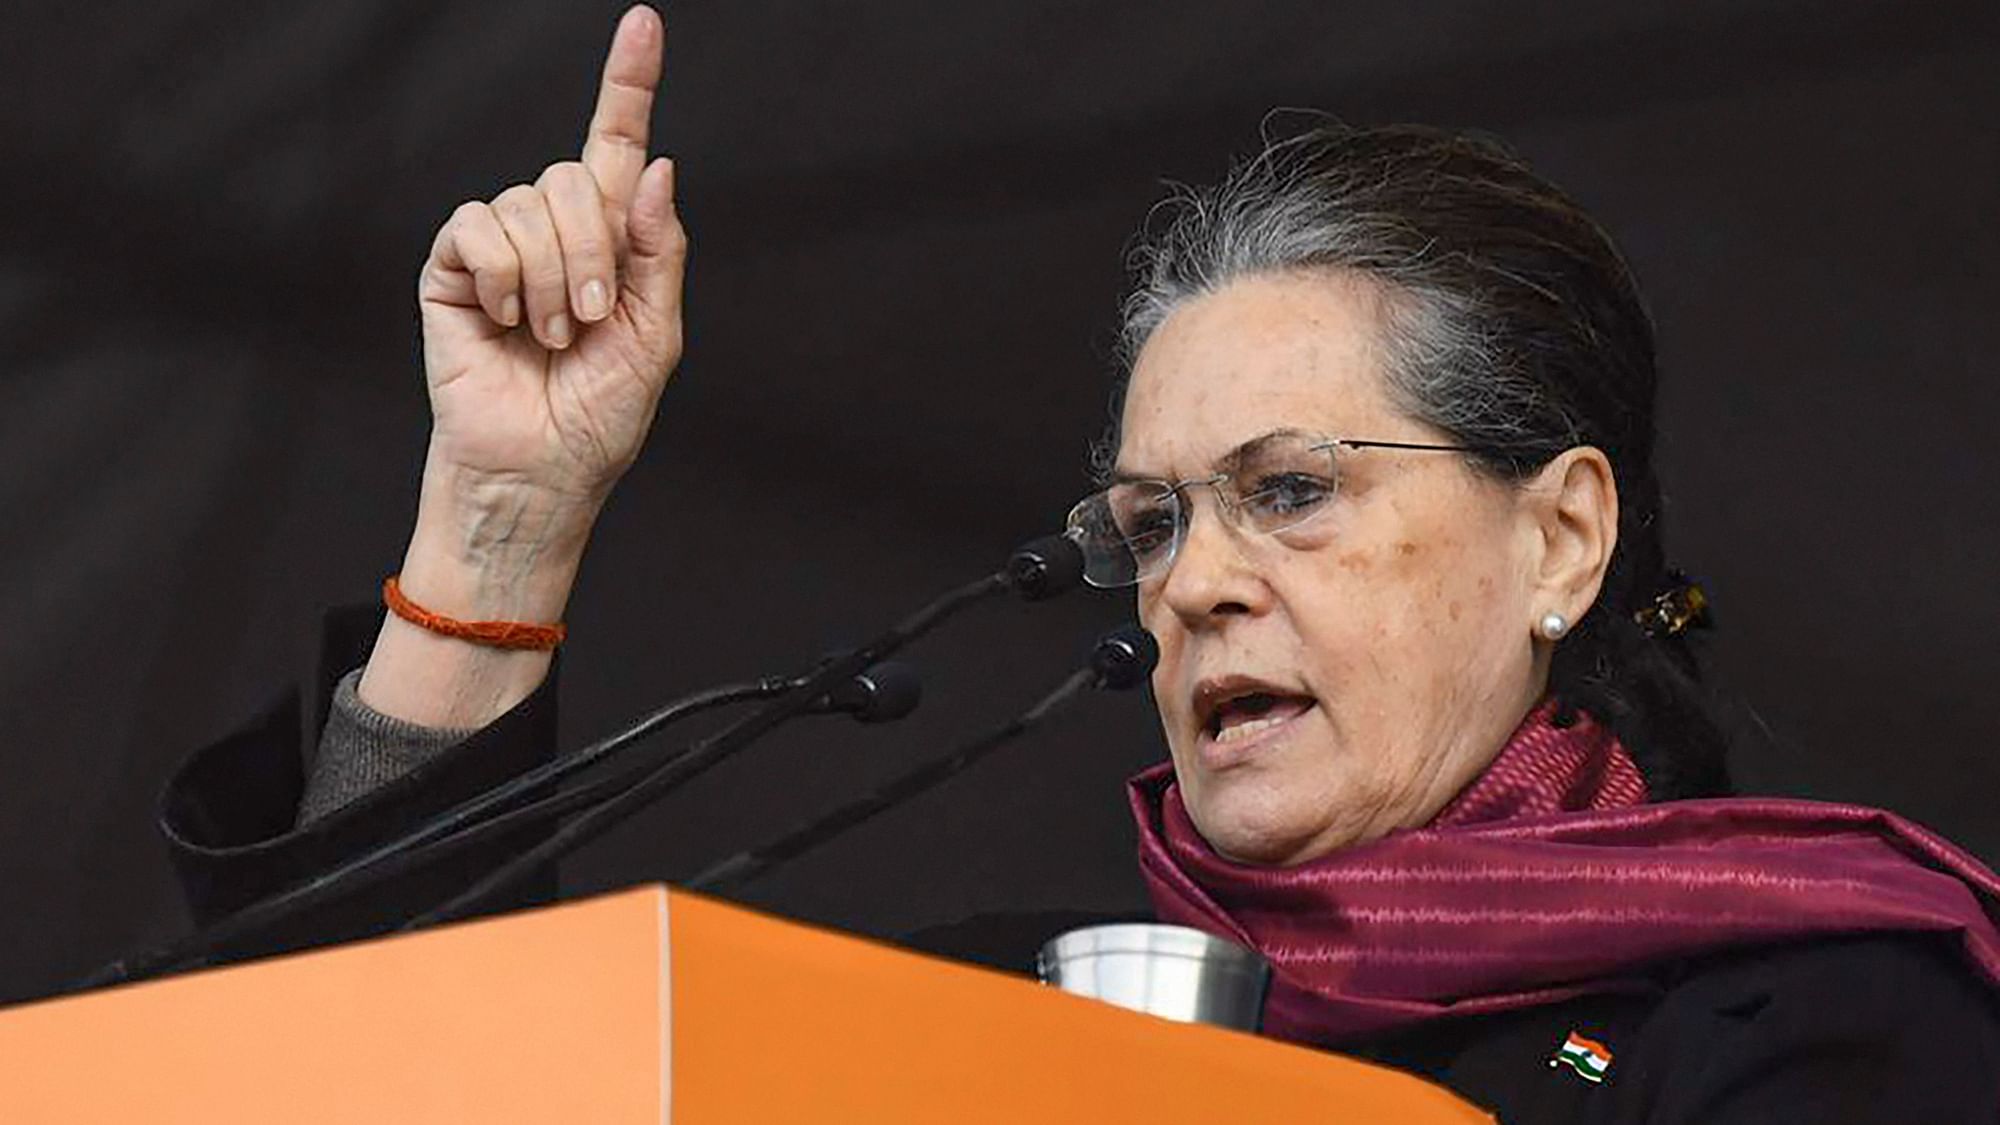 Sonia Gandhi has directed party governments in different states to “explore” and pass laws to “override” or negate the newly enacted central farm laws.